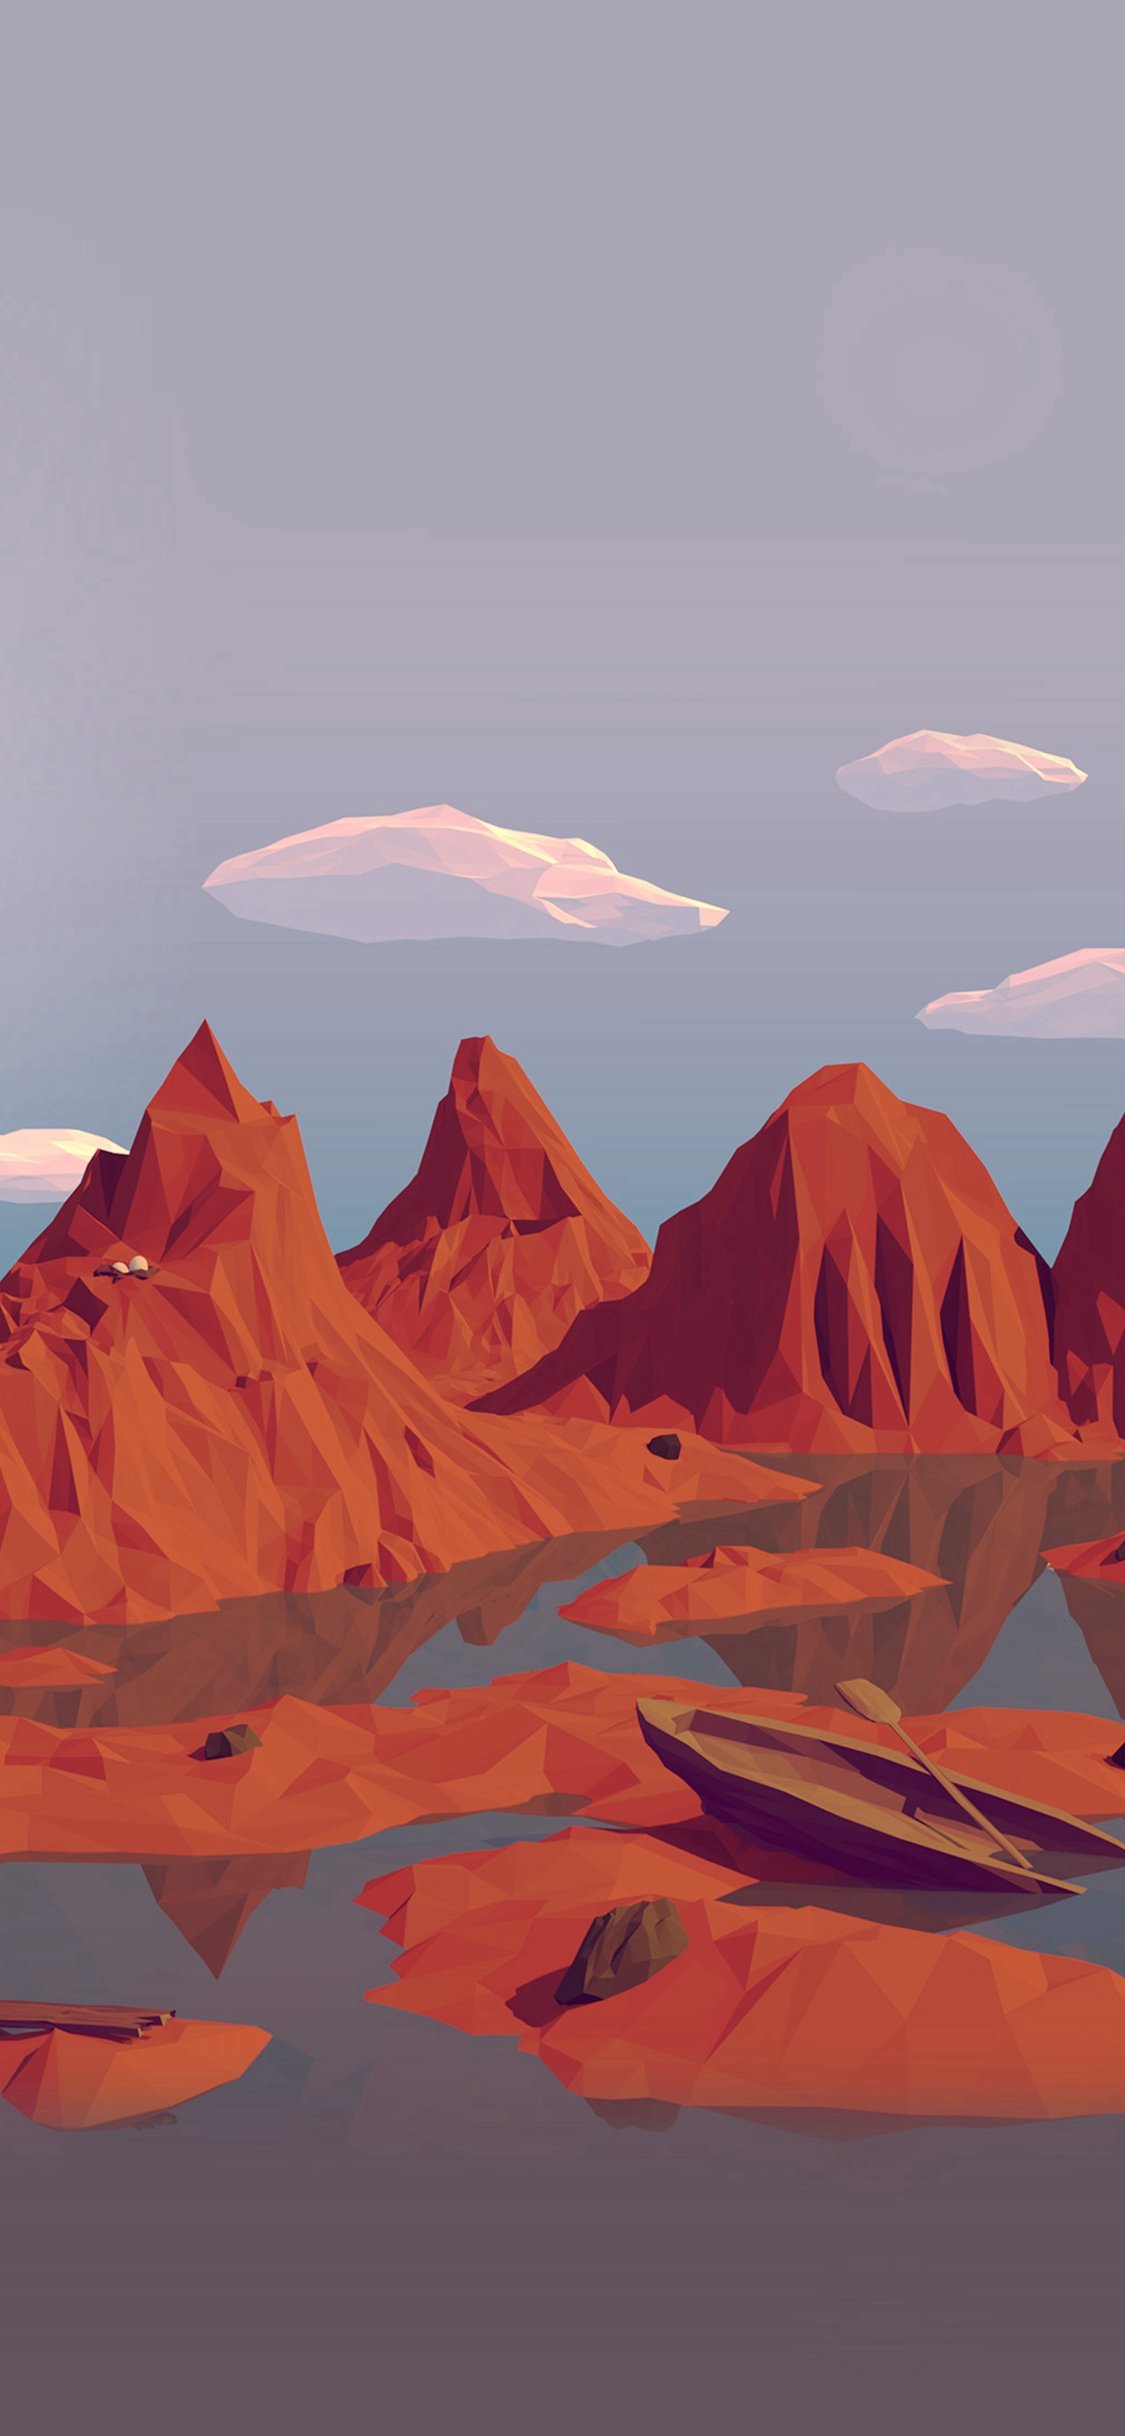 Low Poly Art Mountain Red Illust Art iPhone X Wallpapers Free Download